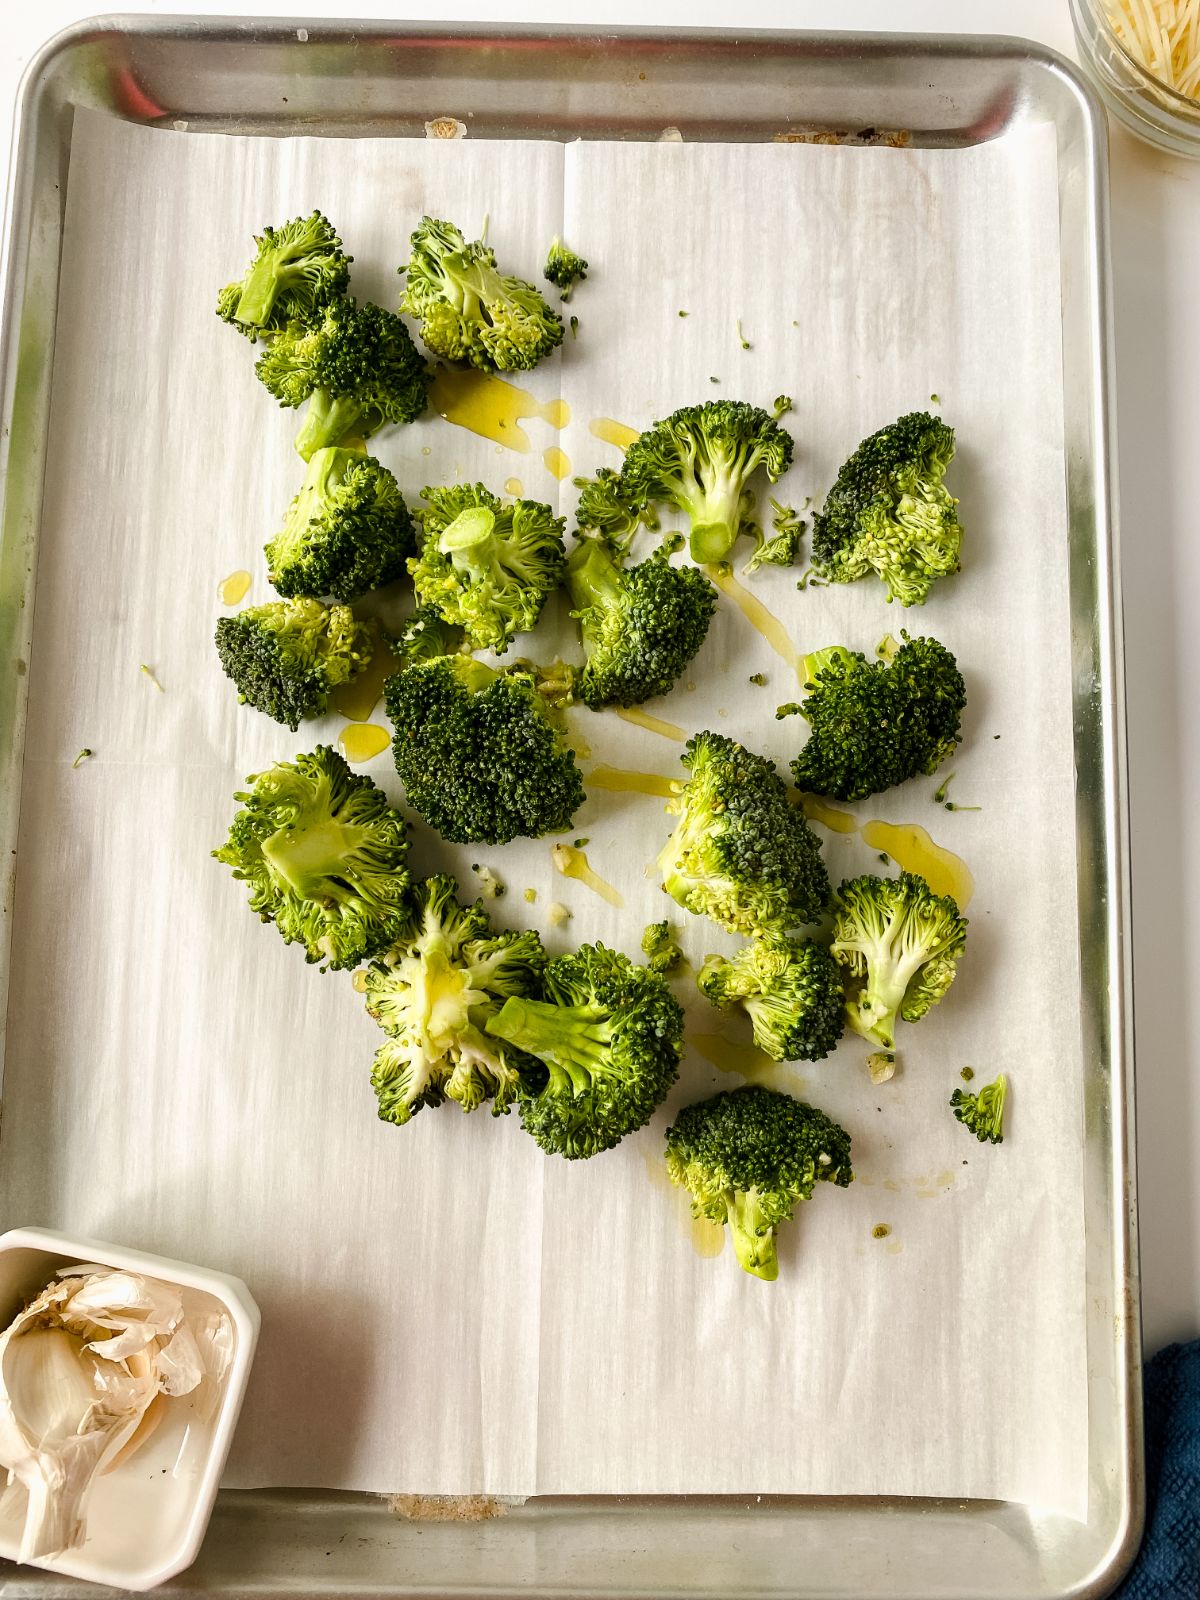 broccoli on parchment paper on baking sheet before baking